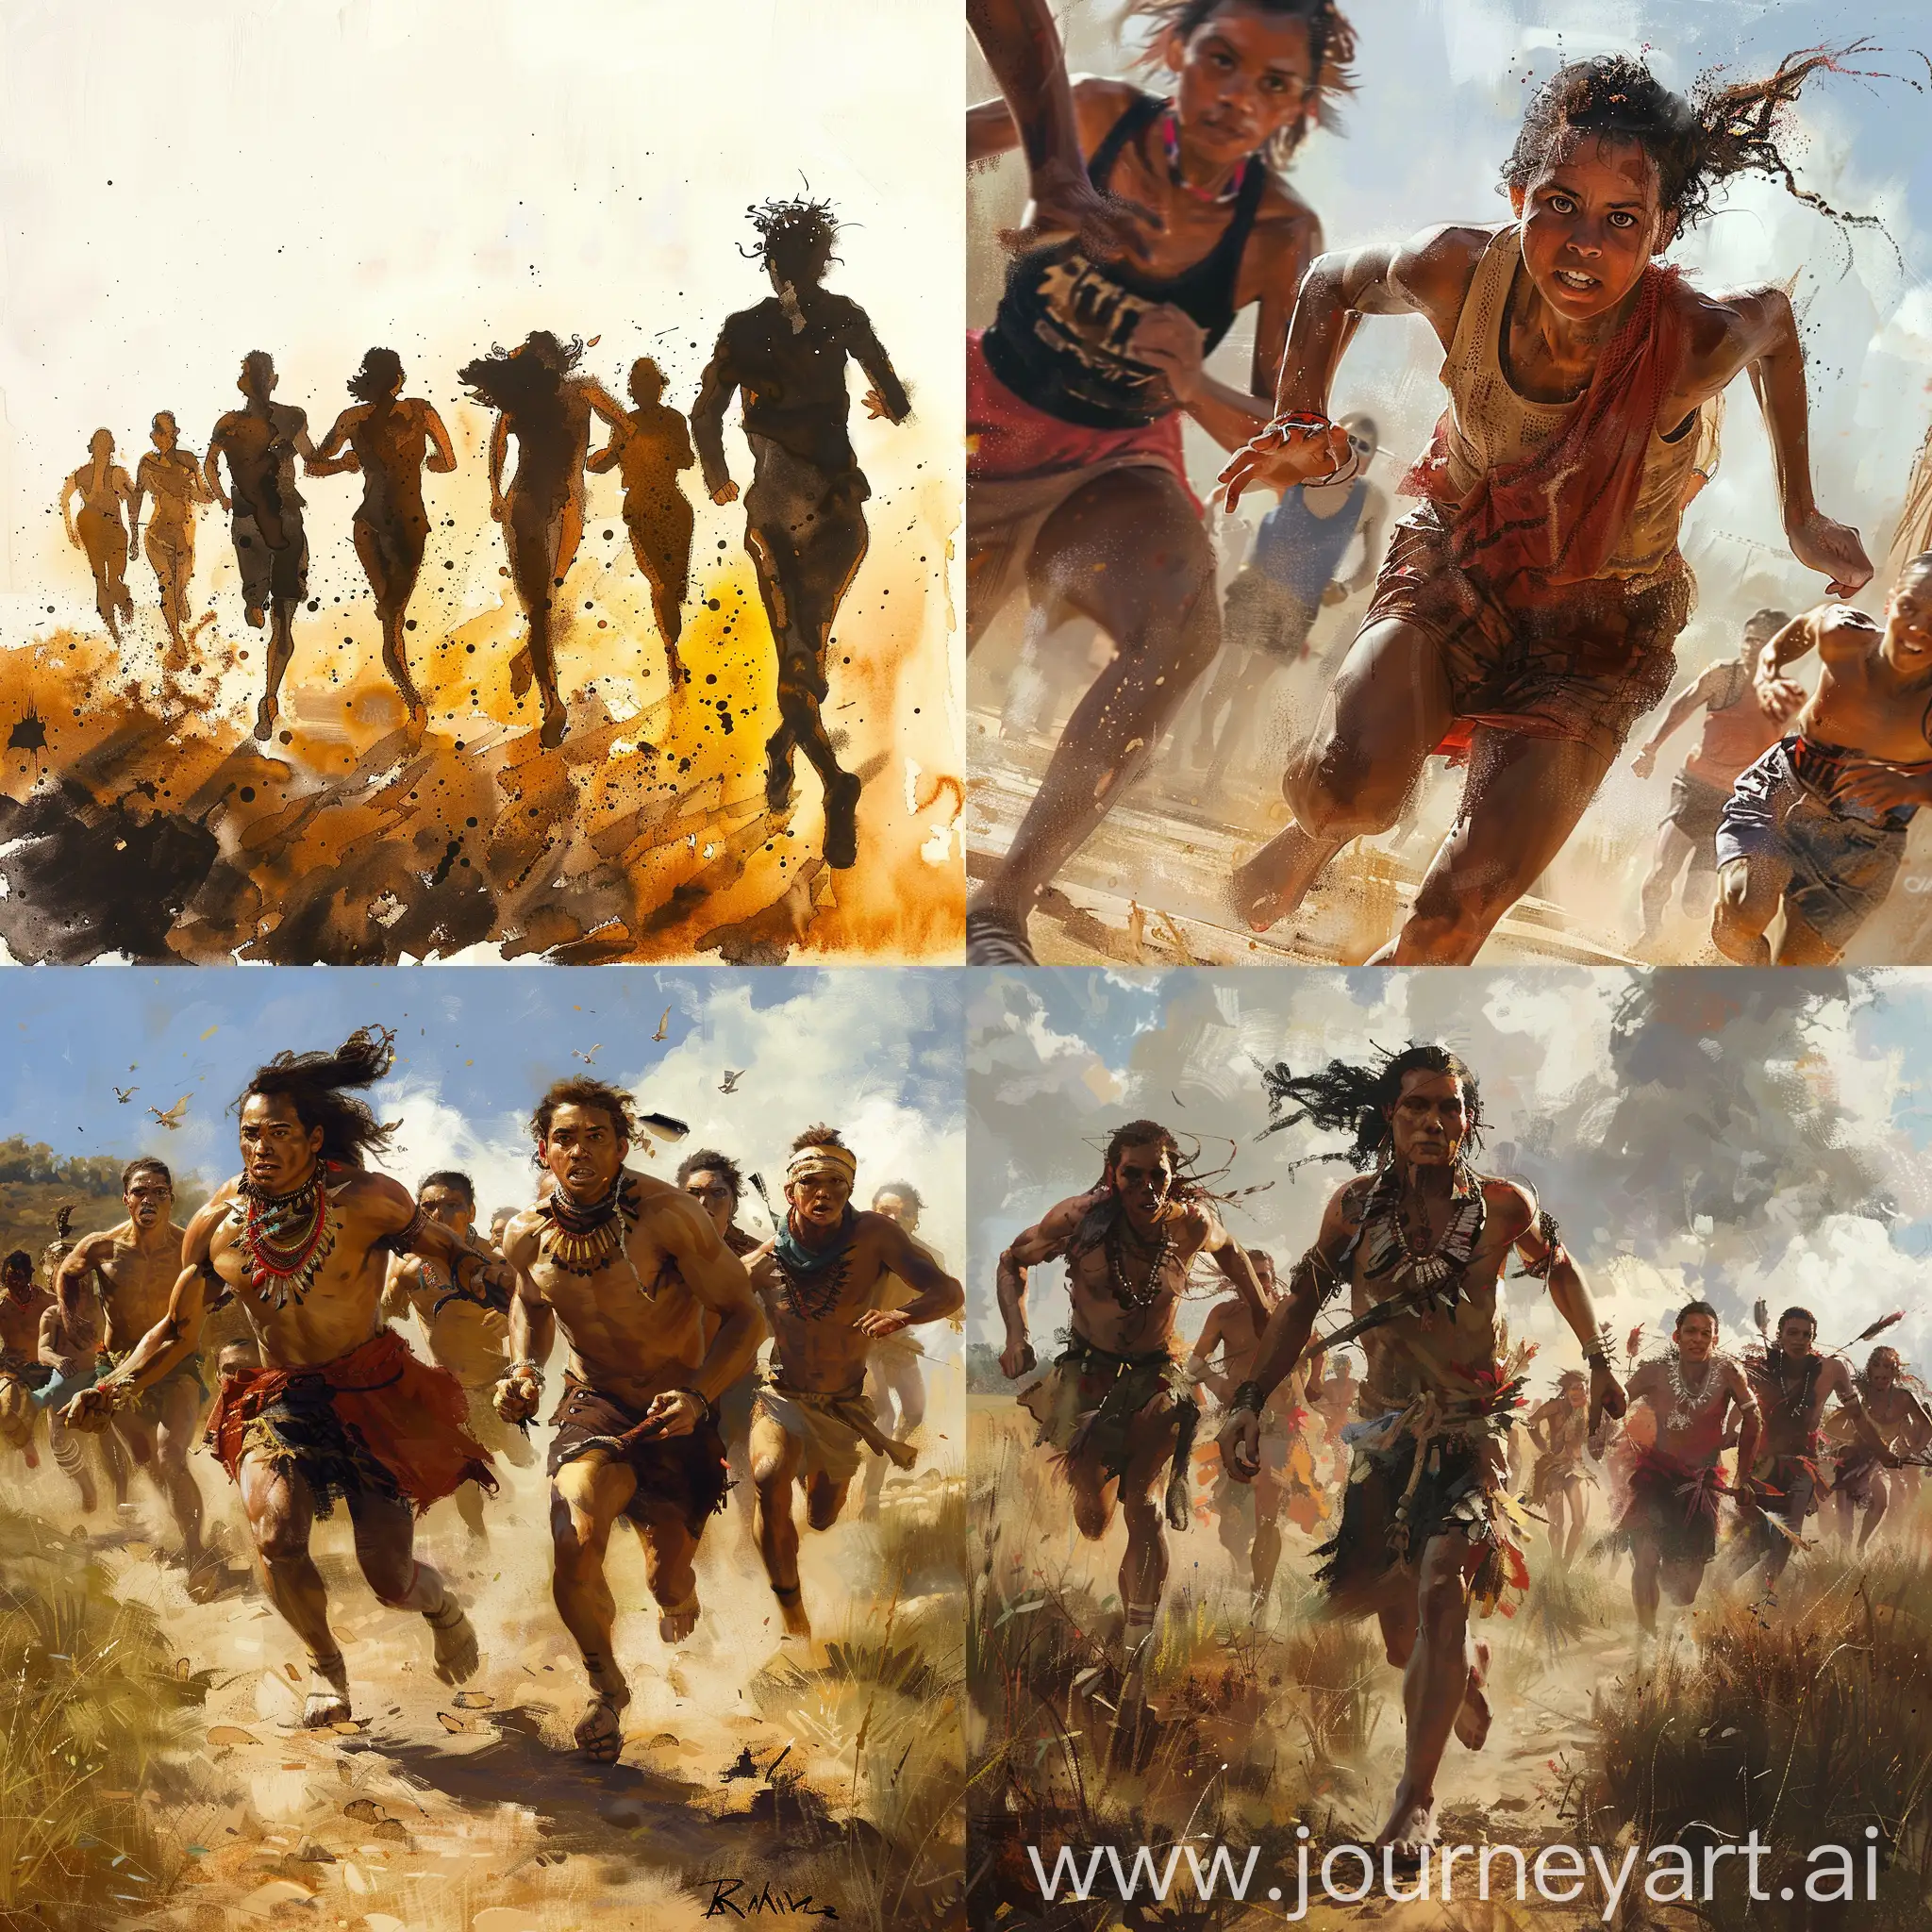 Group-of-Diverse-People-Running-Together-Outdoors